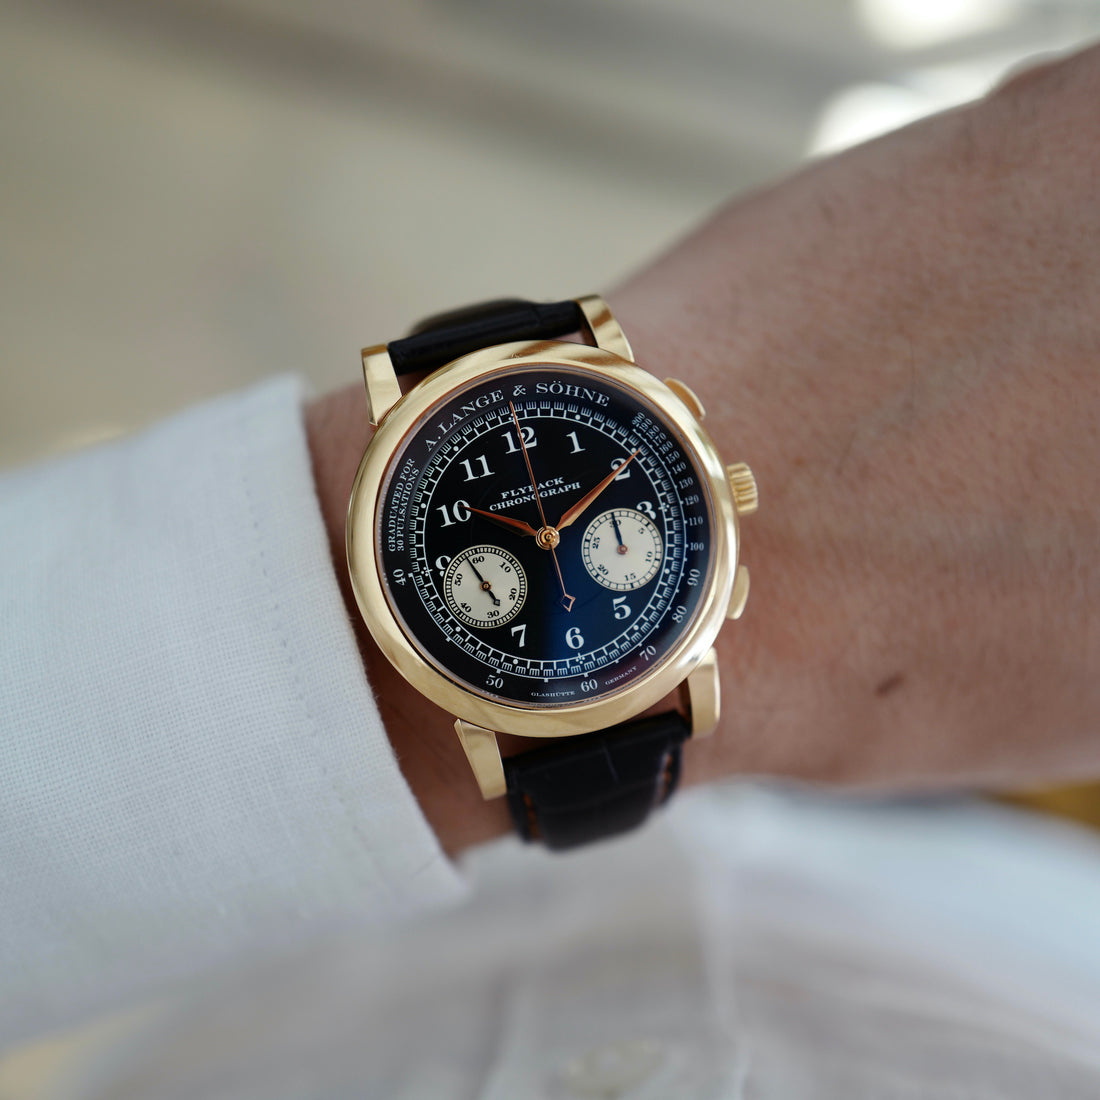 A. Lange & Sohne Rose Gold 1815 Flyback Chronograph Watch